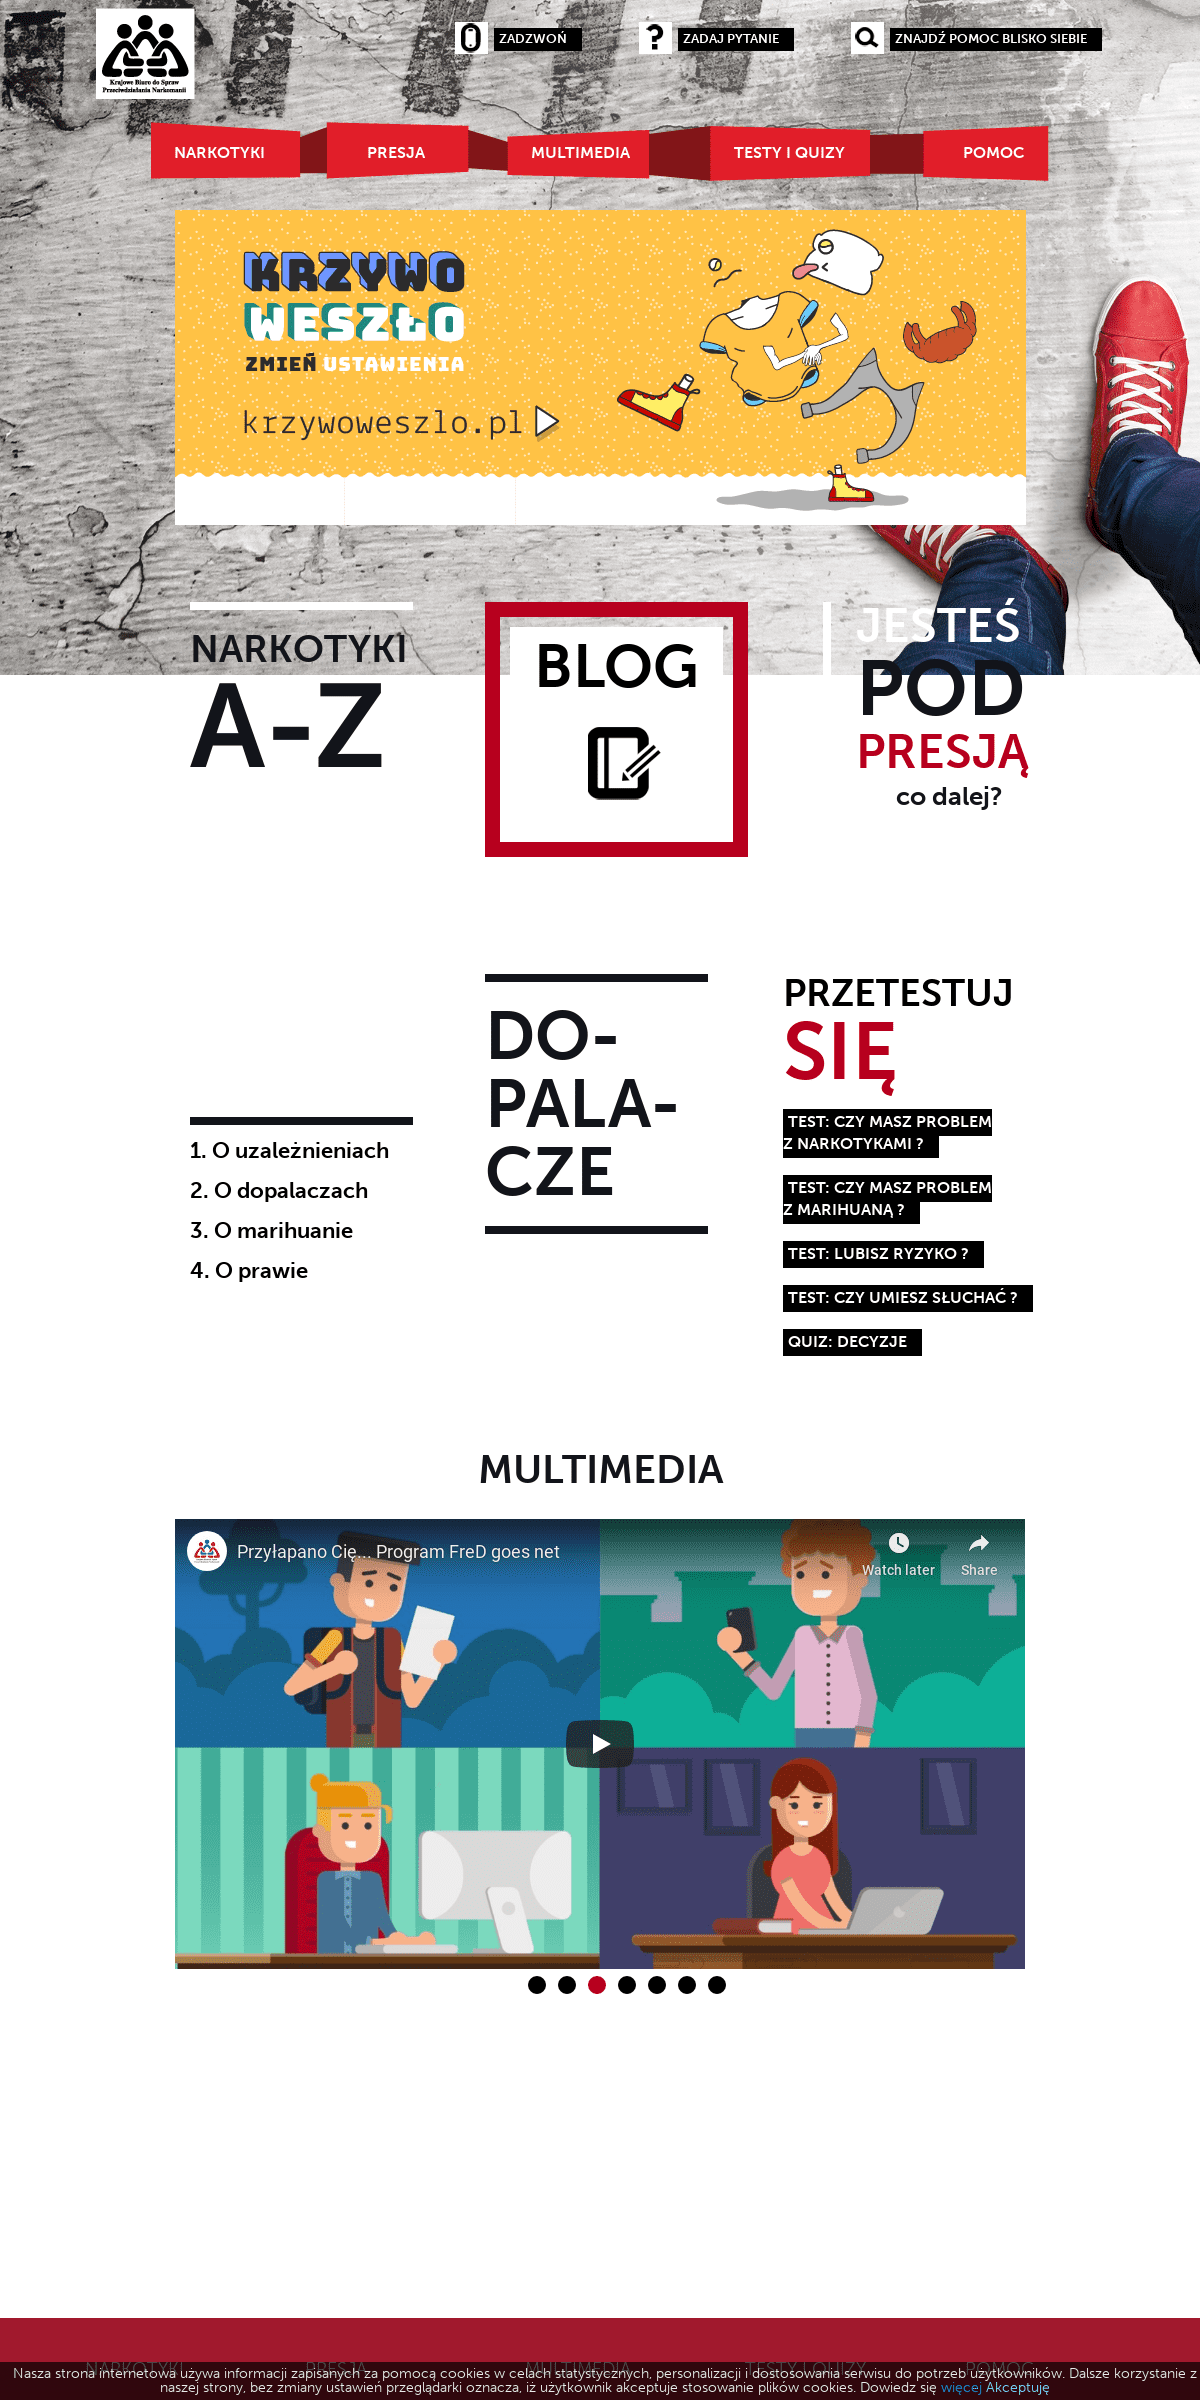 A complete backup of dopalaczeinfo.pl